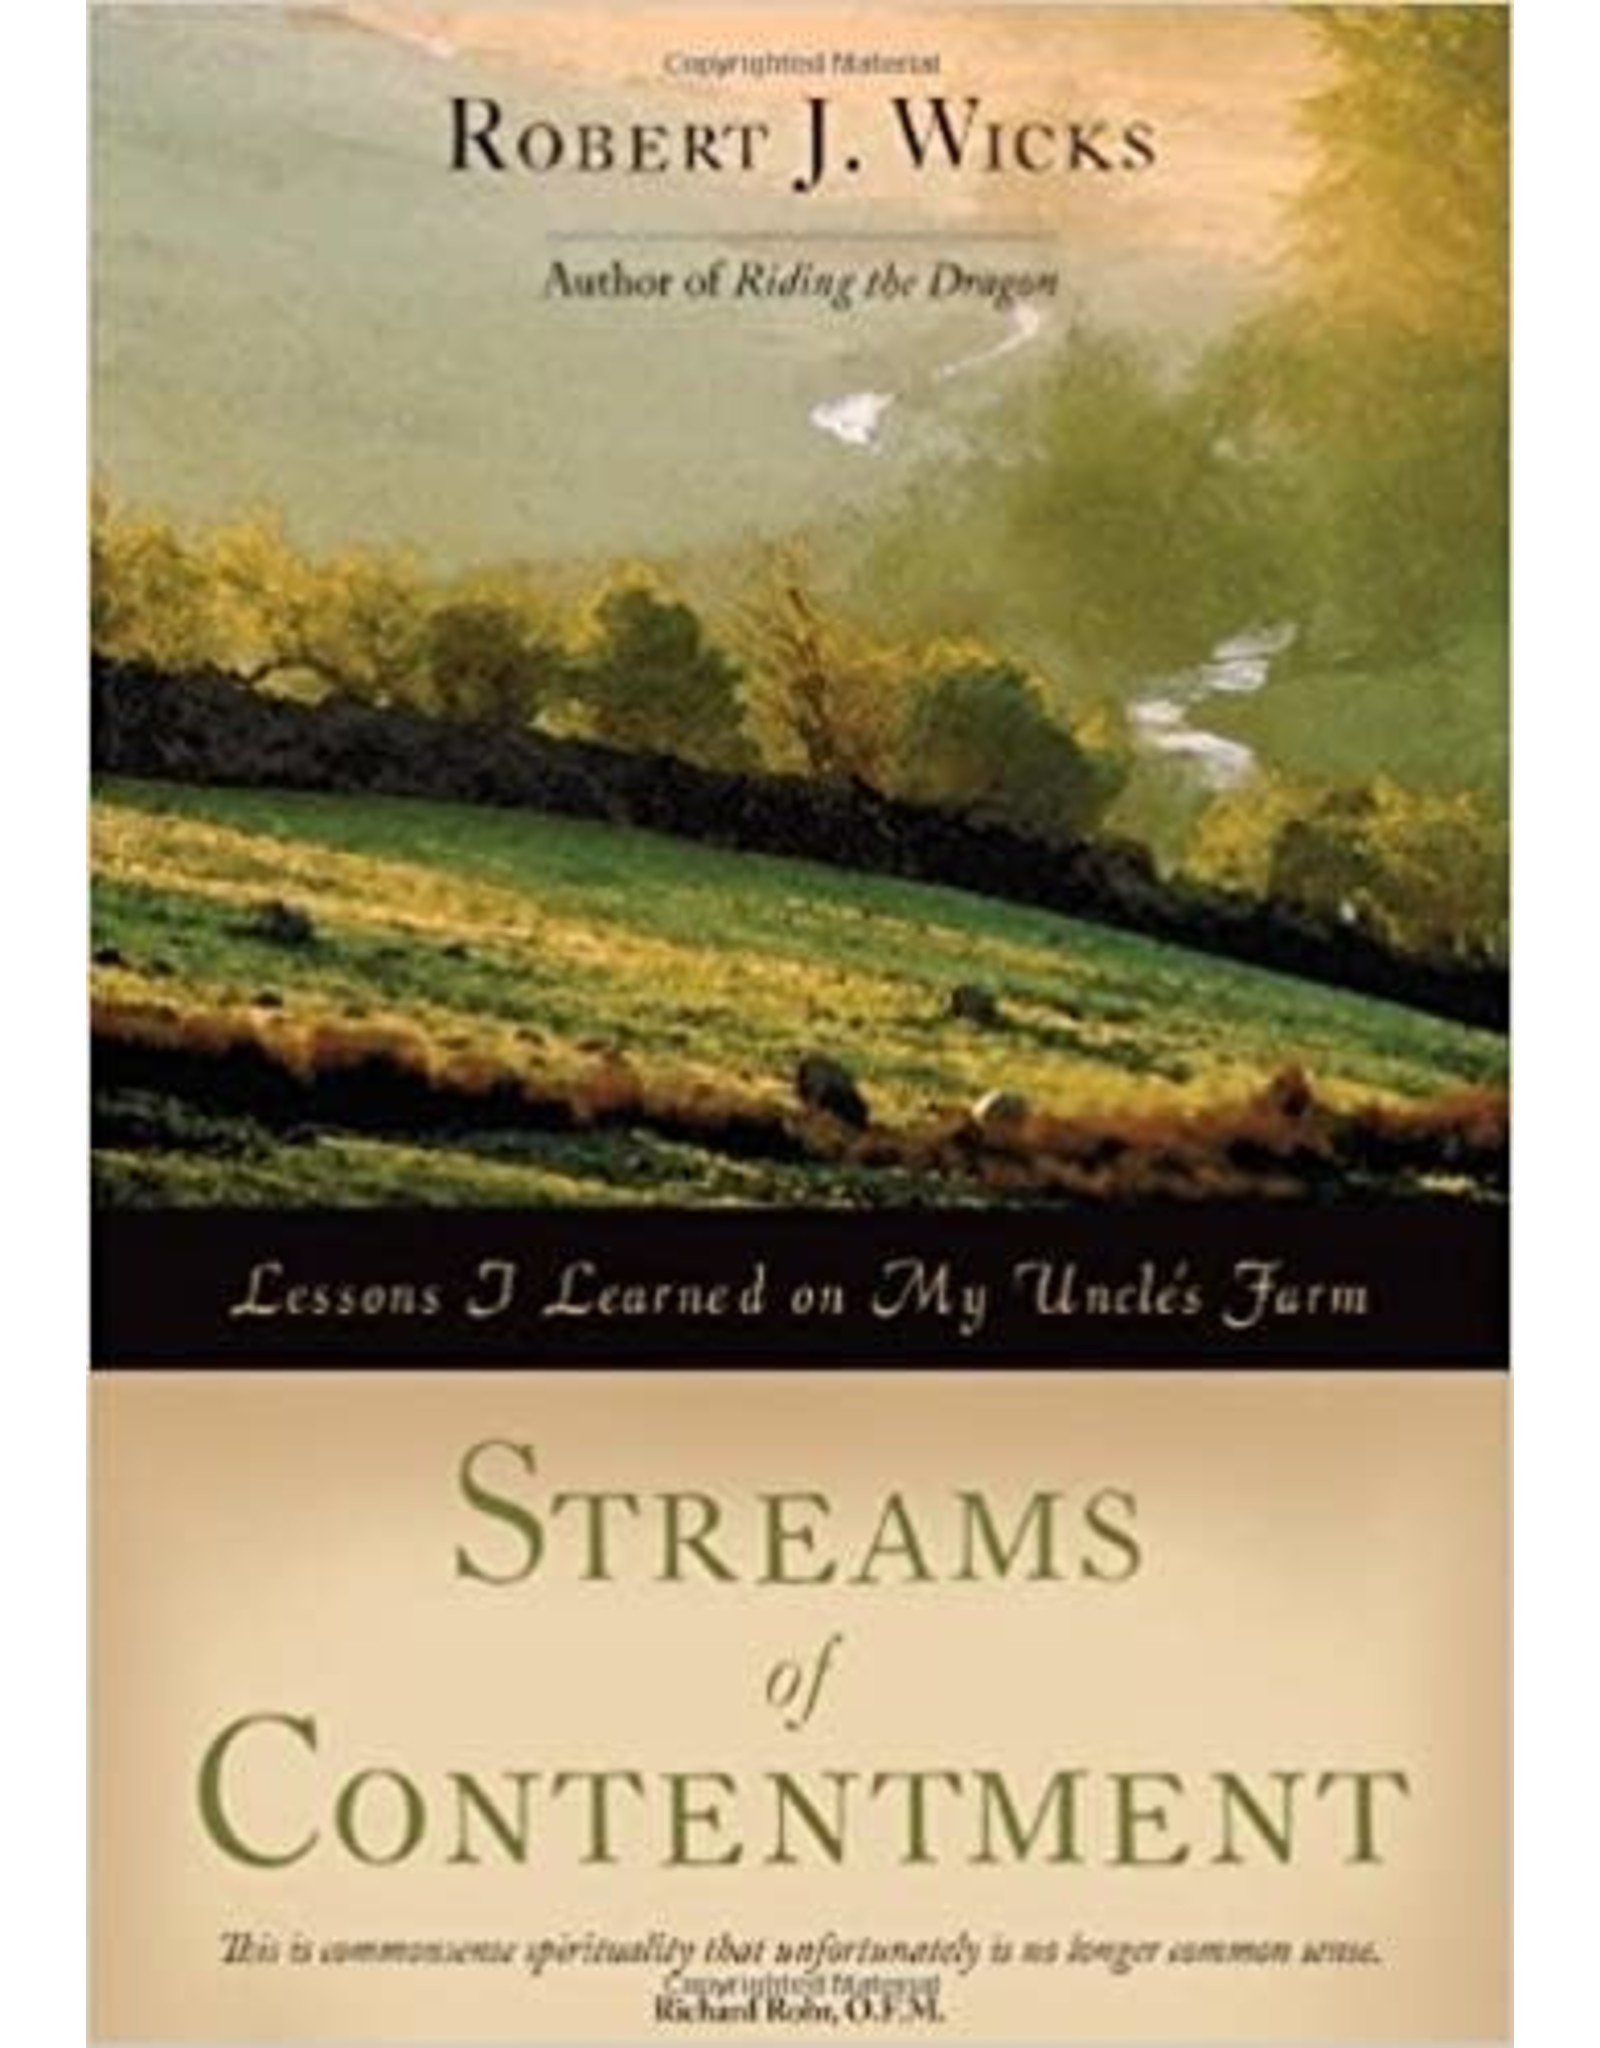 Streams of Contentment: Lessons I Learned on My Uncle's Farm